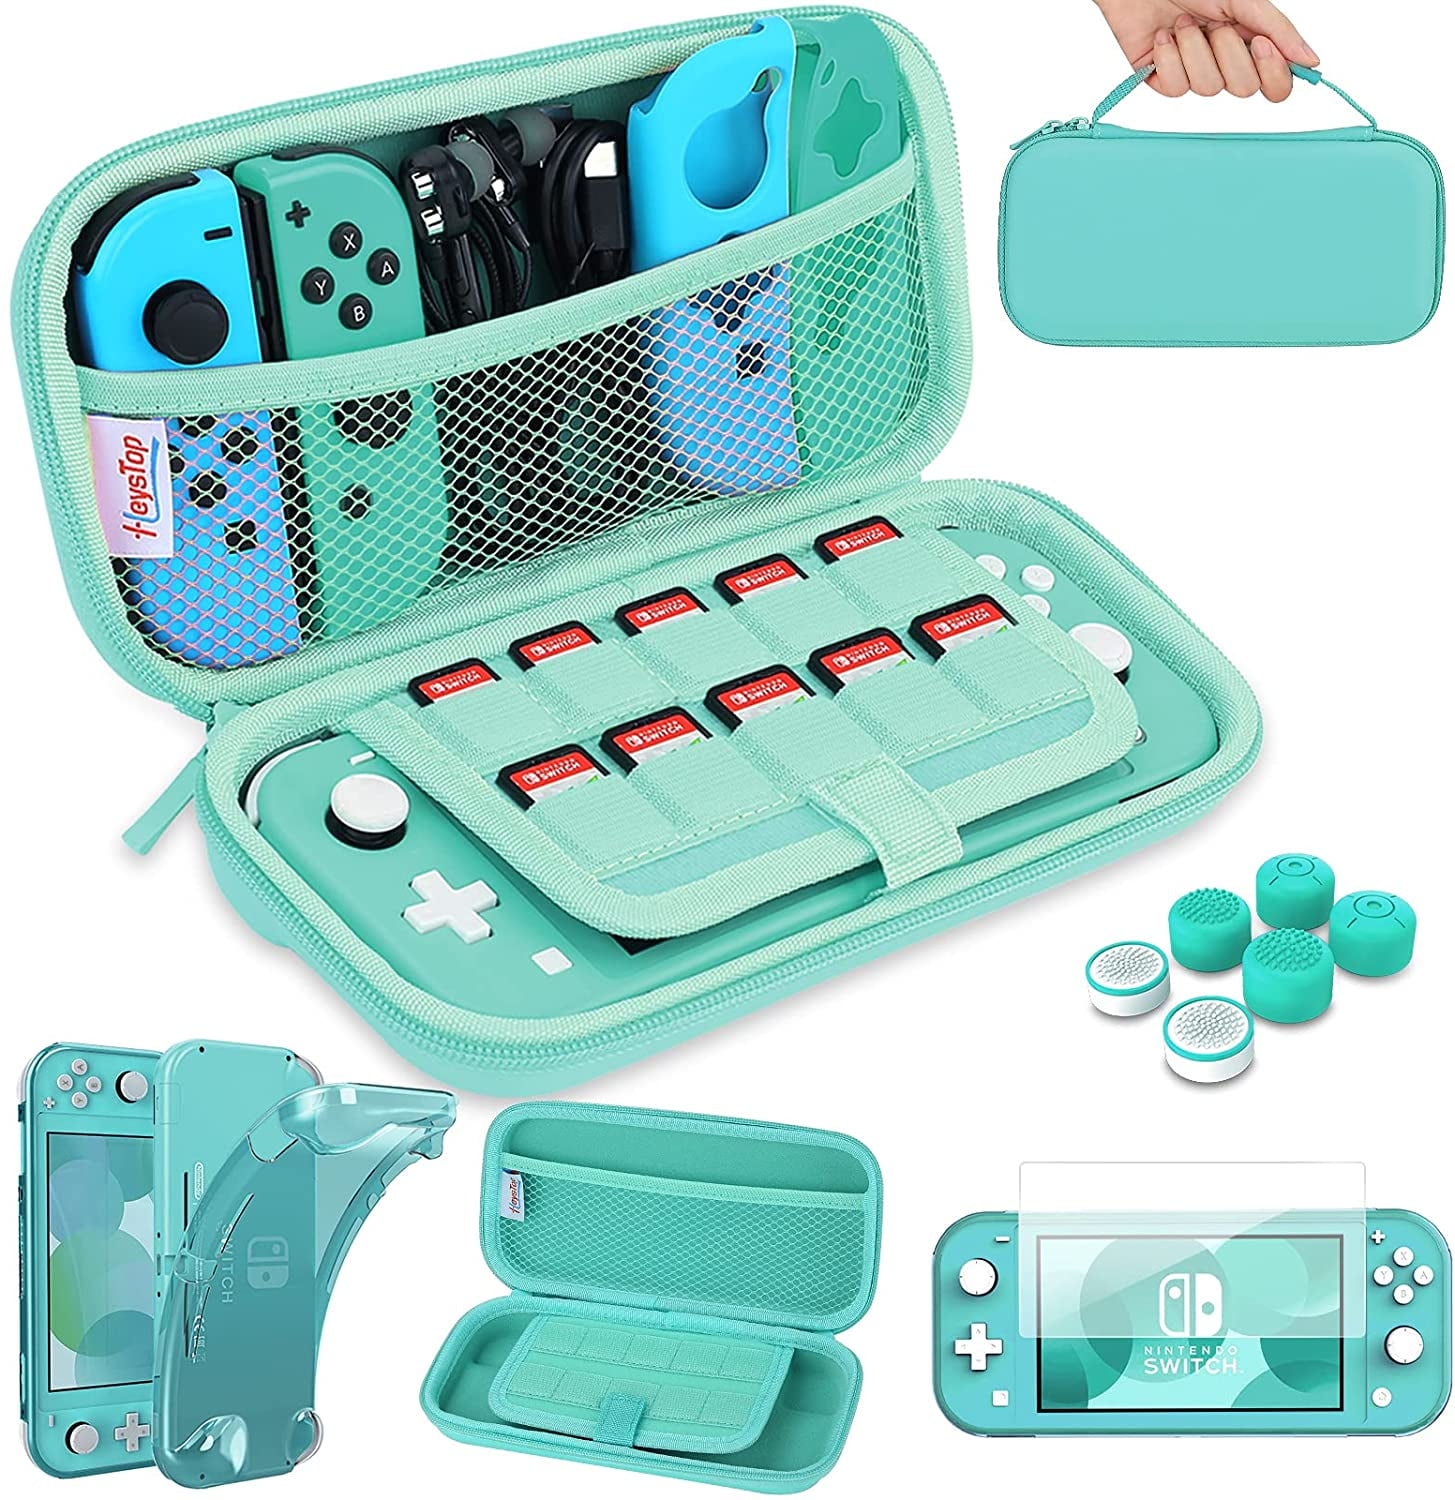 HEYSTOP Compatible with Switch Lite Carrying Case, Switch Lite Case with Soft TPU Case Games Card 6 Thumb Grip Caps for Nintendo Switch Lite Accessories Kit(Turquoise) - Walmart.com